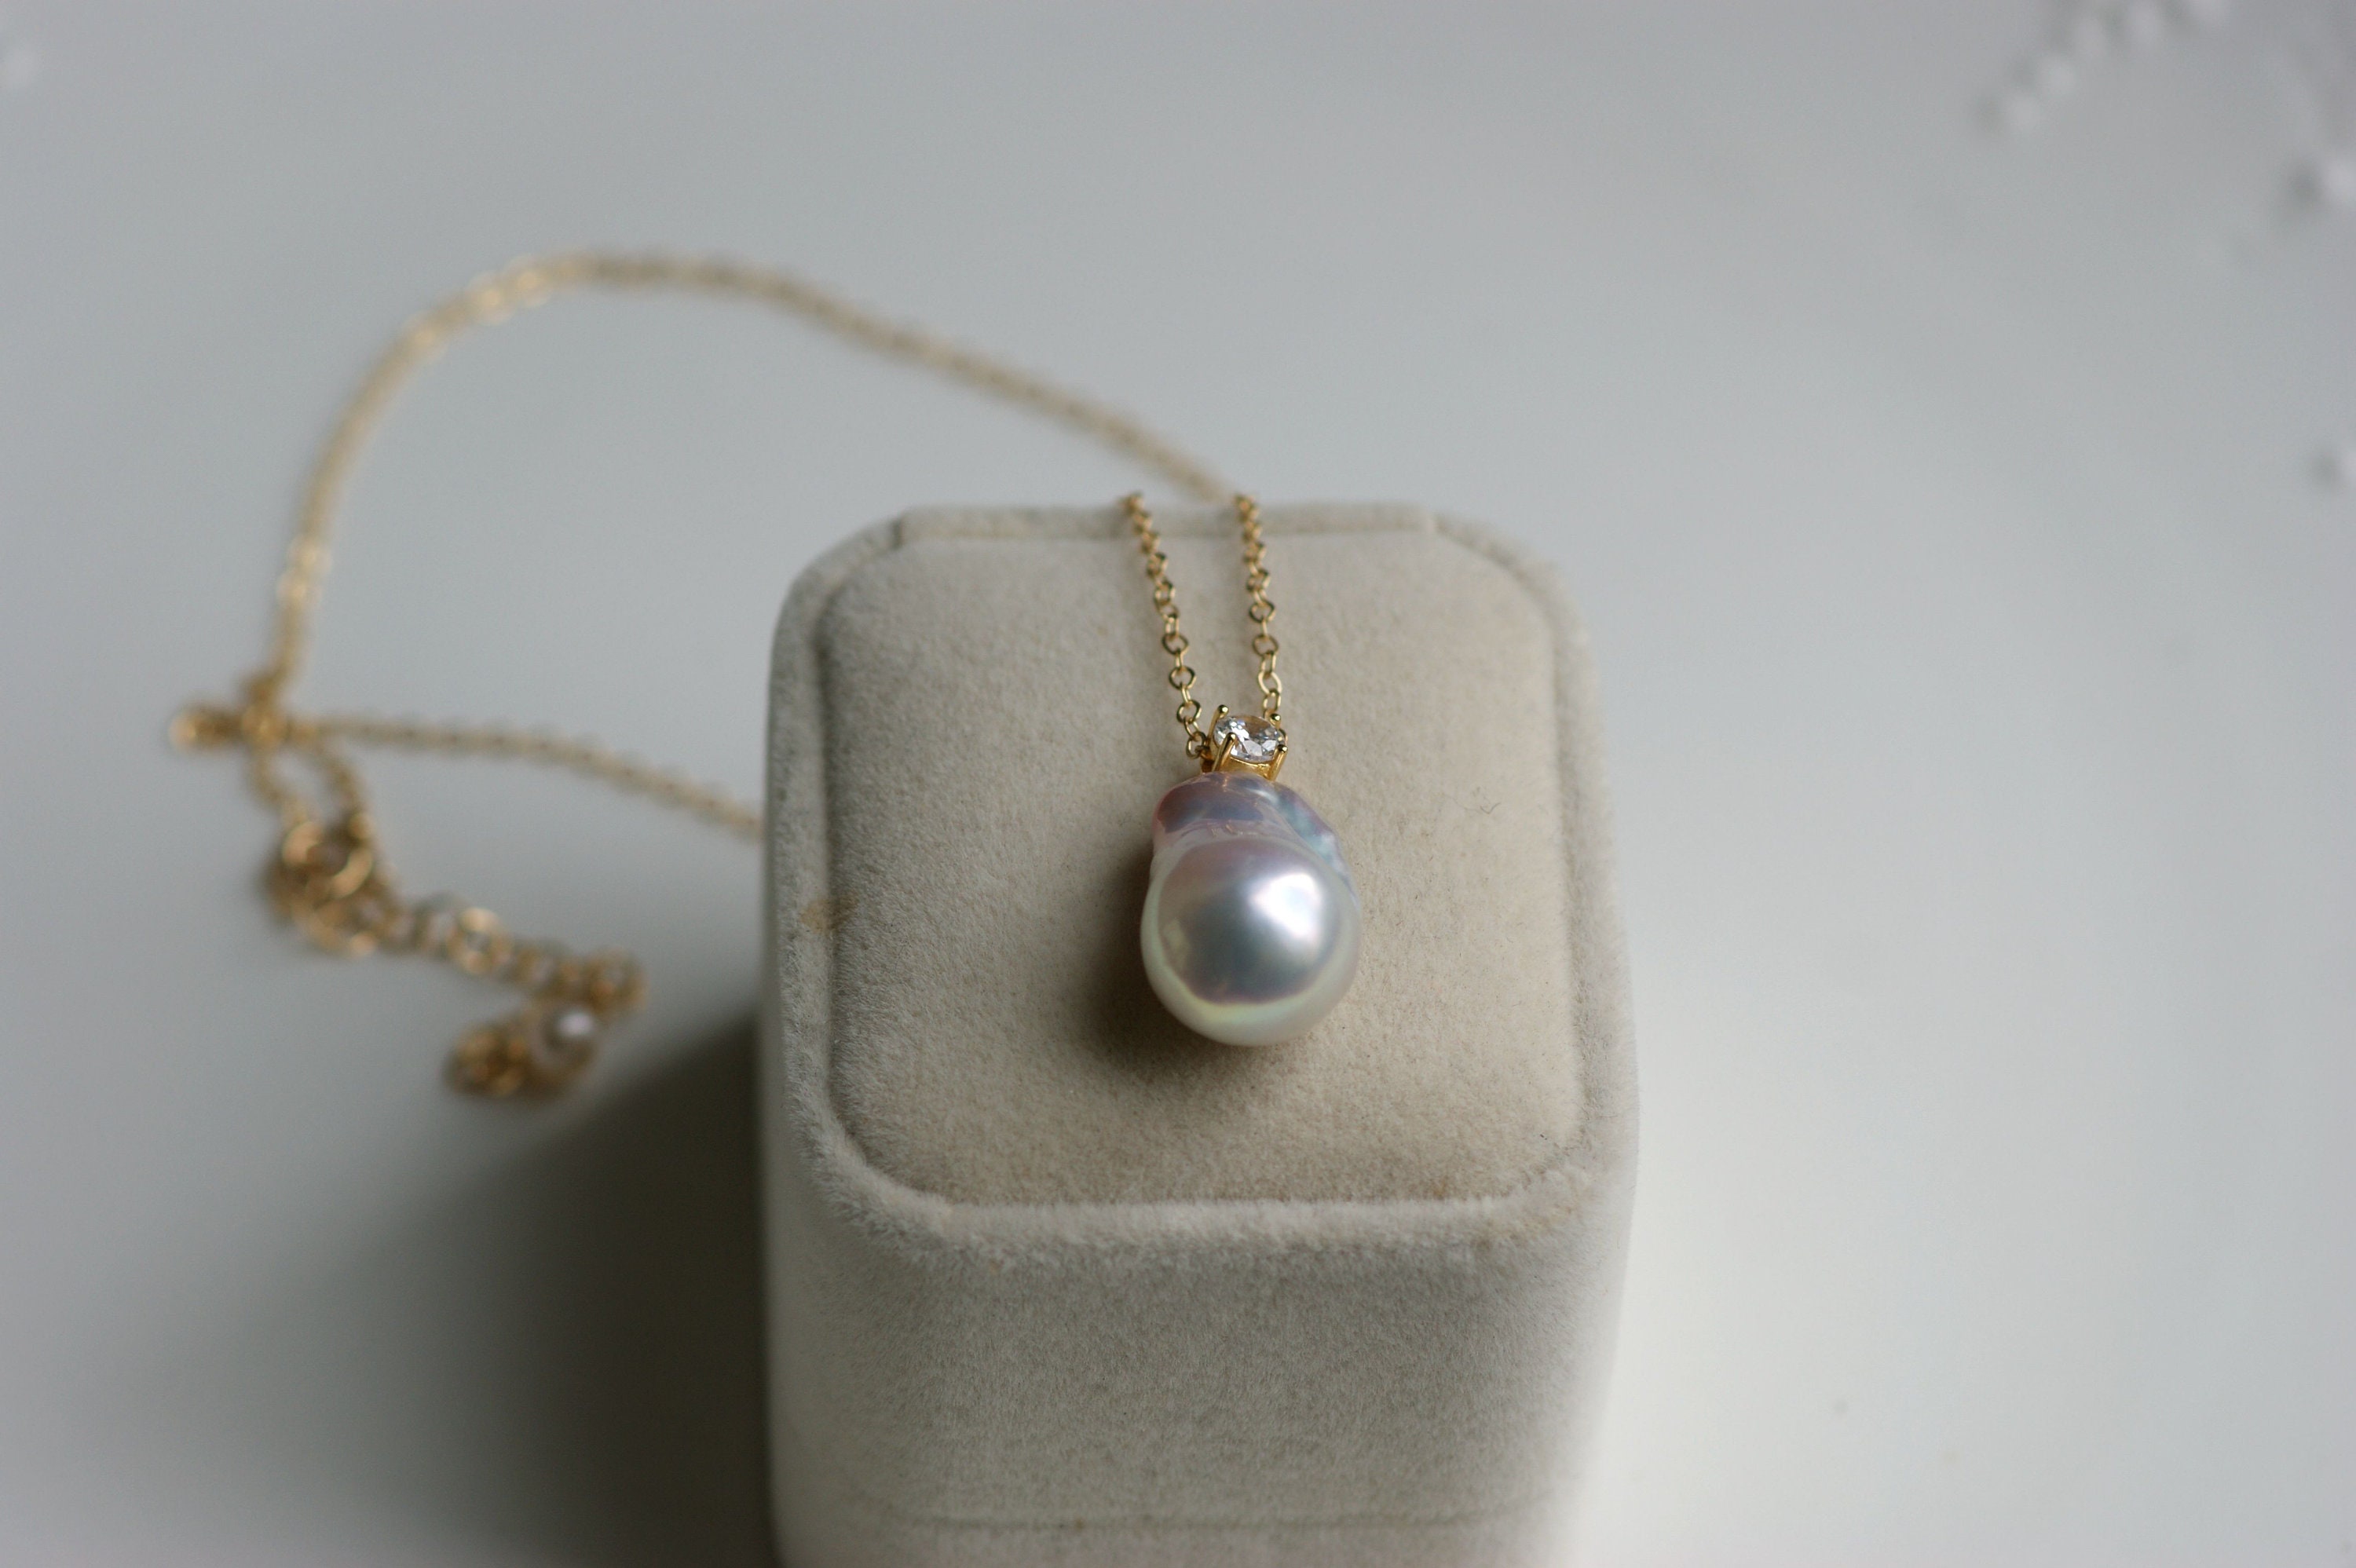 Pearl Necklace with Diamond Charm- SOLD - Sholdt Jewelry Design